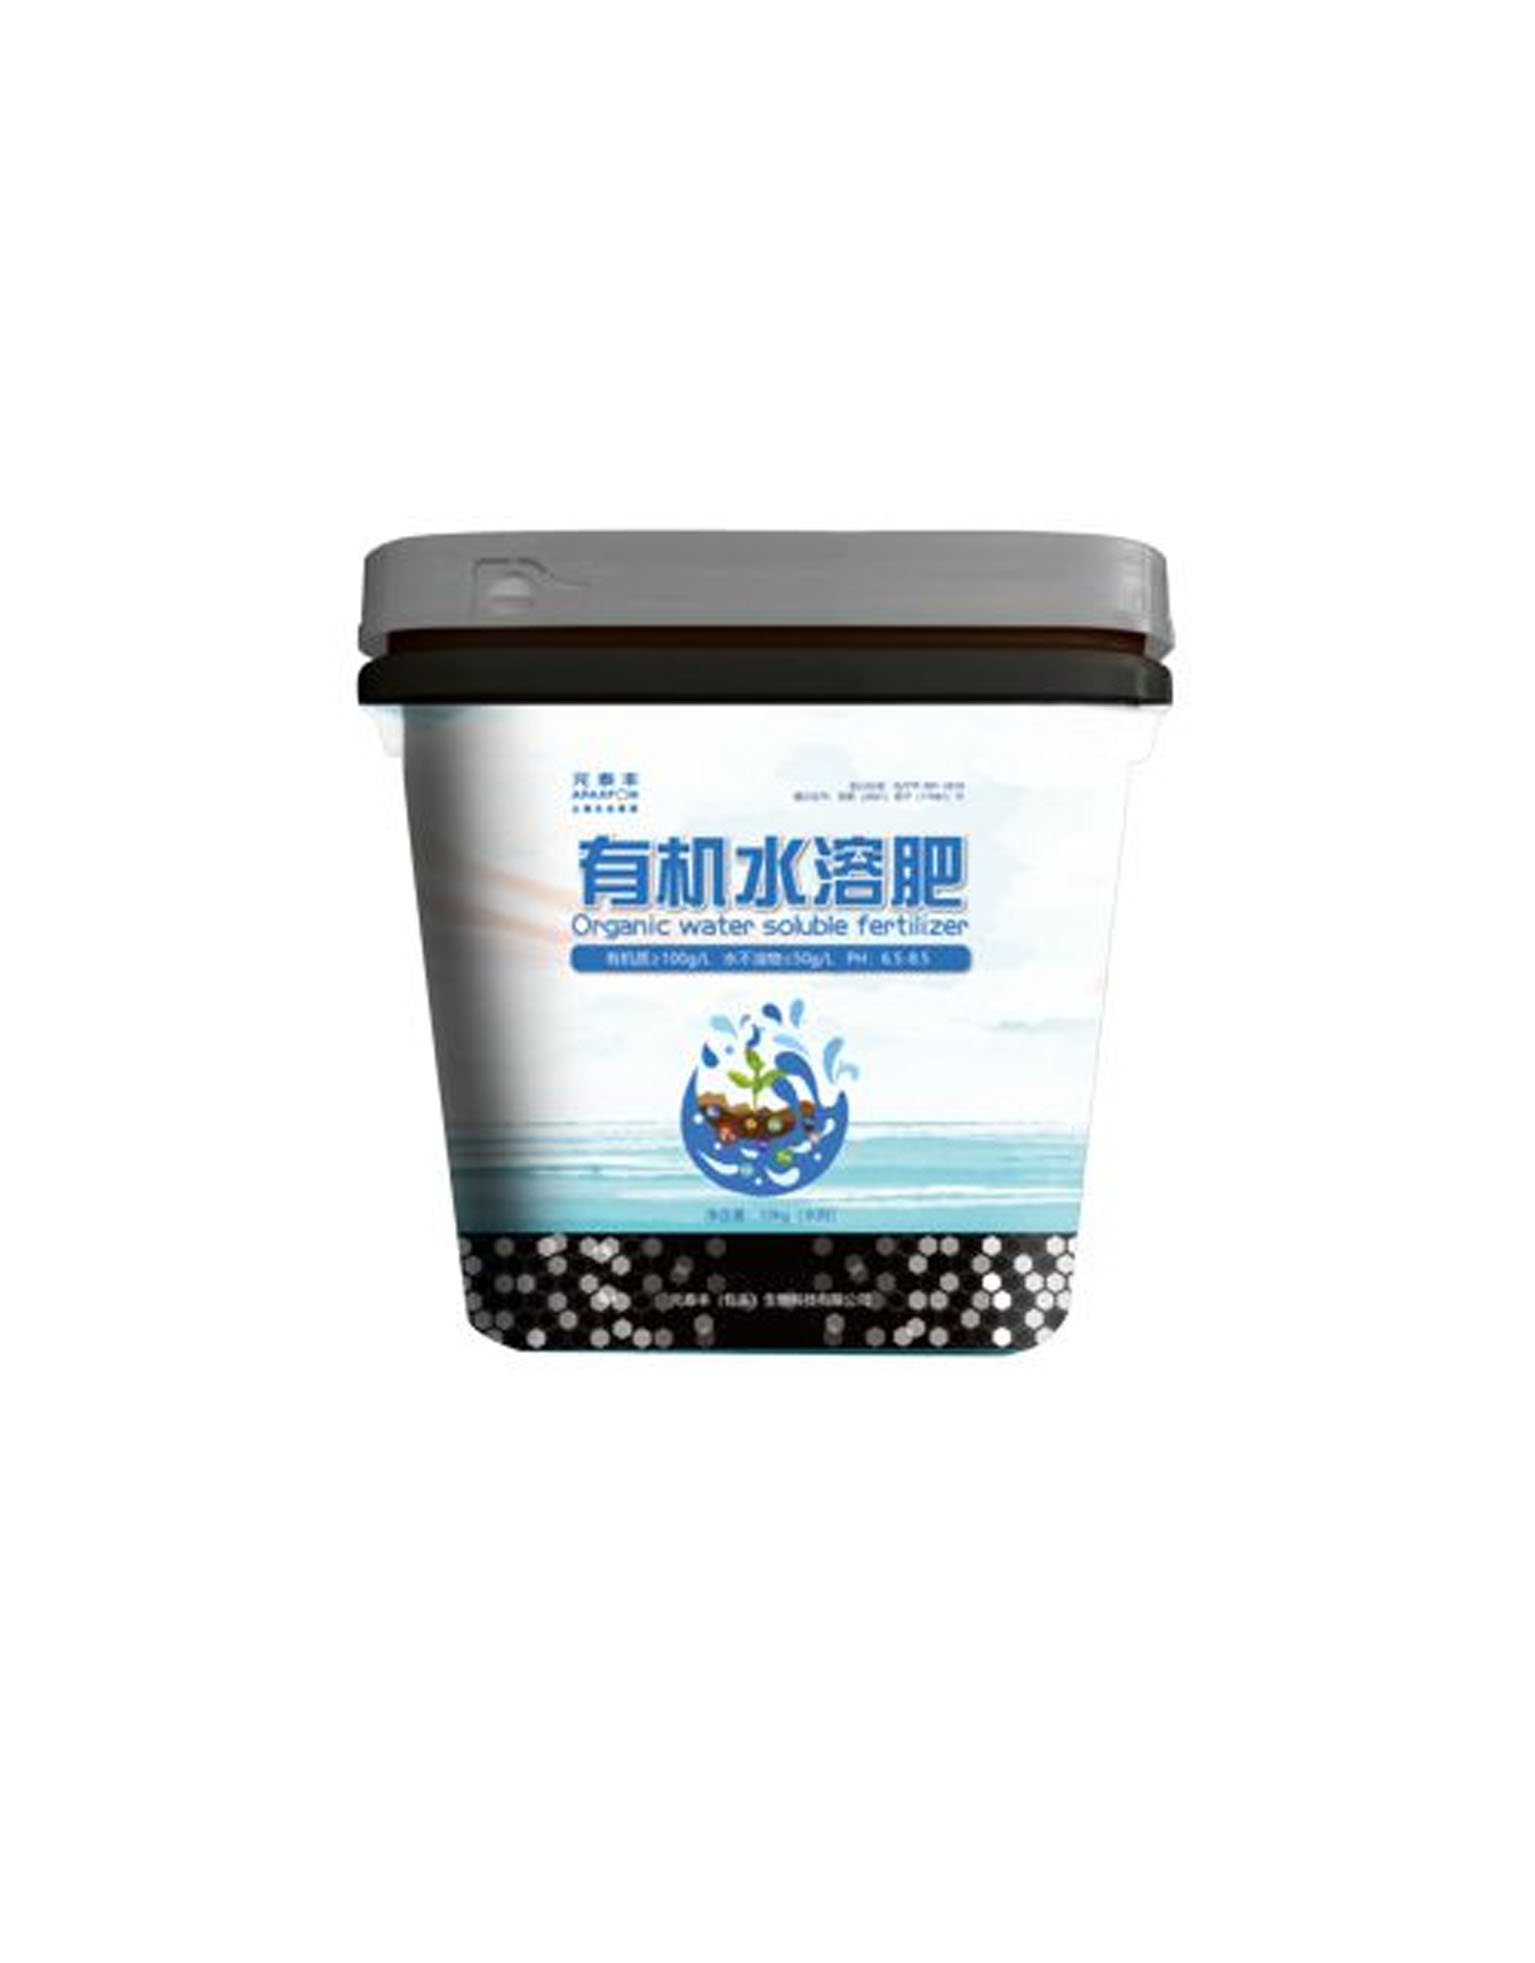 Yuantaifeng Organic Water-soluble Fertilizer